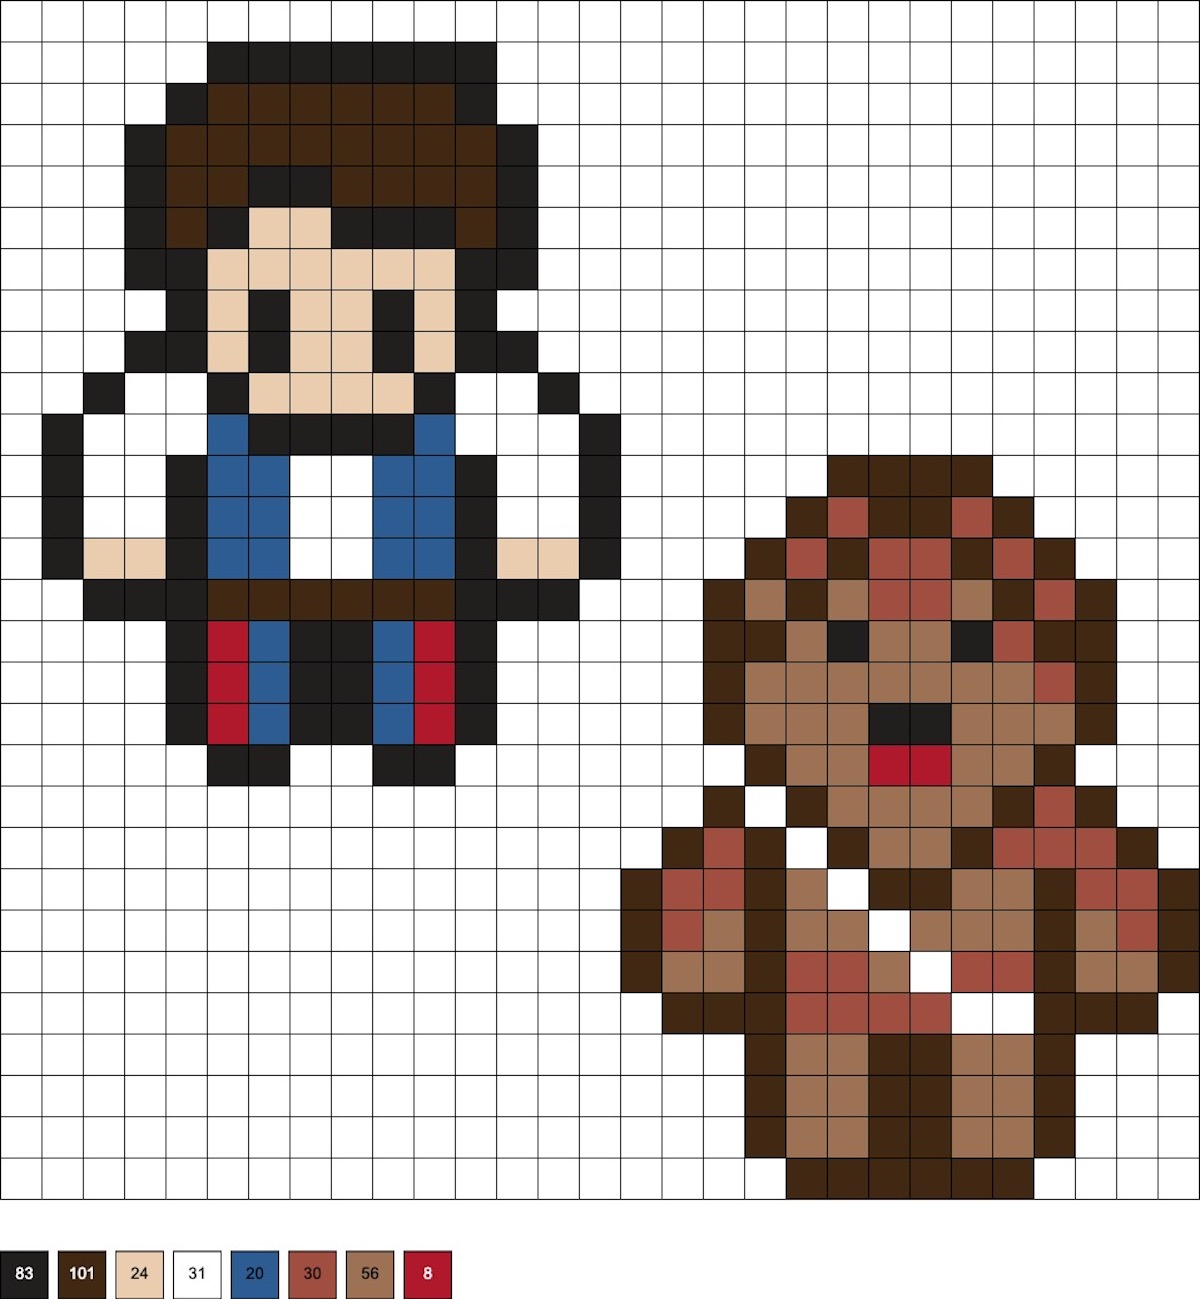 Han solo and chewbacca hama bead patterns